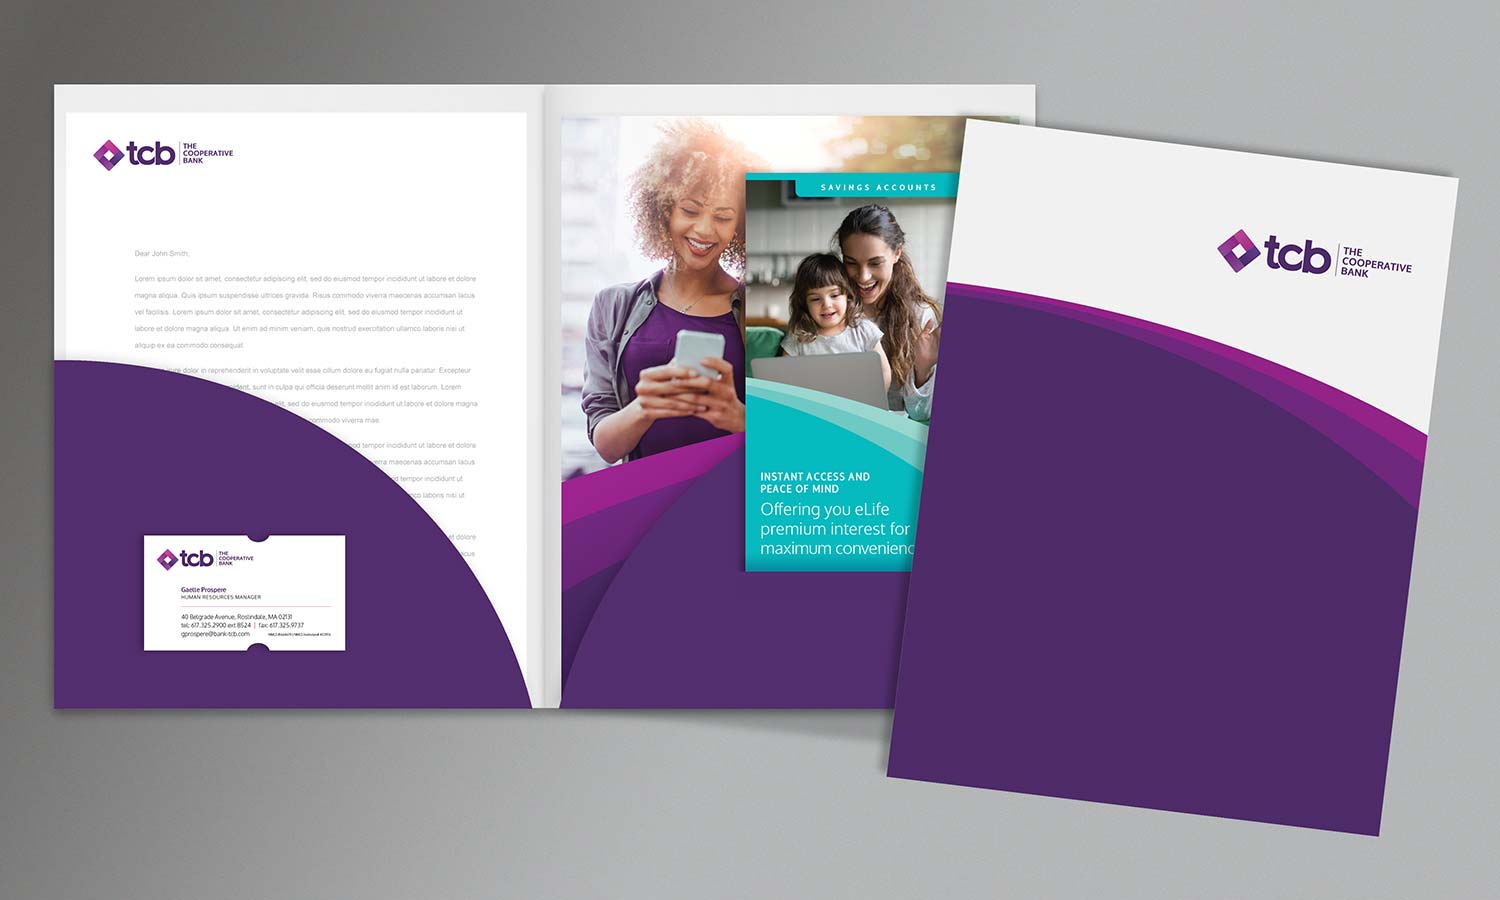 Marketing collateral for The Cooperative Bank including pocket folder and service brochures